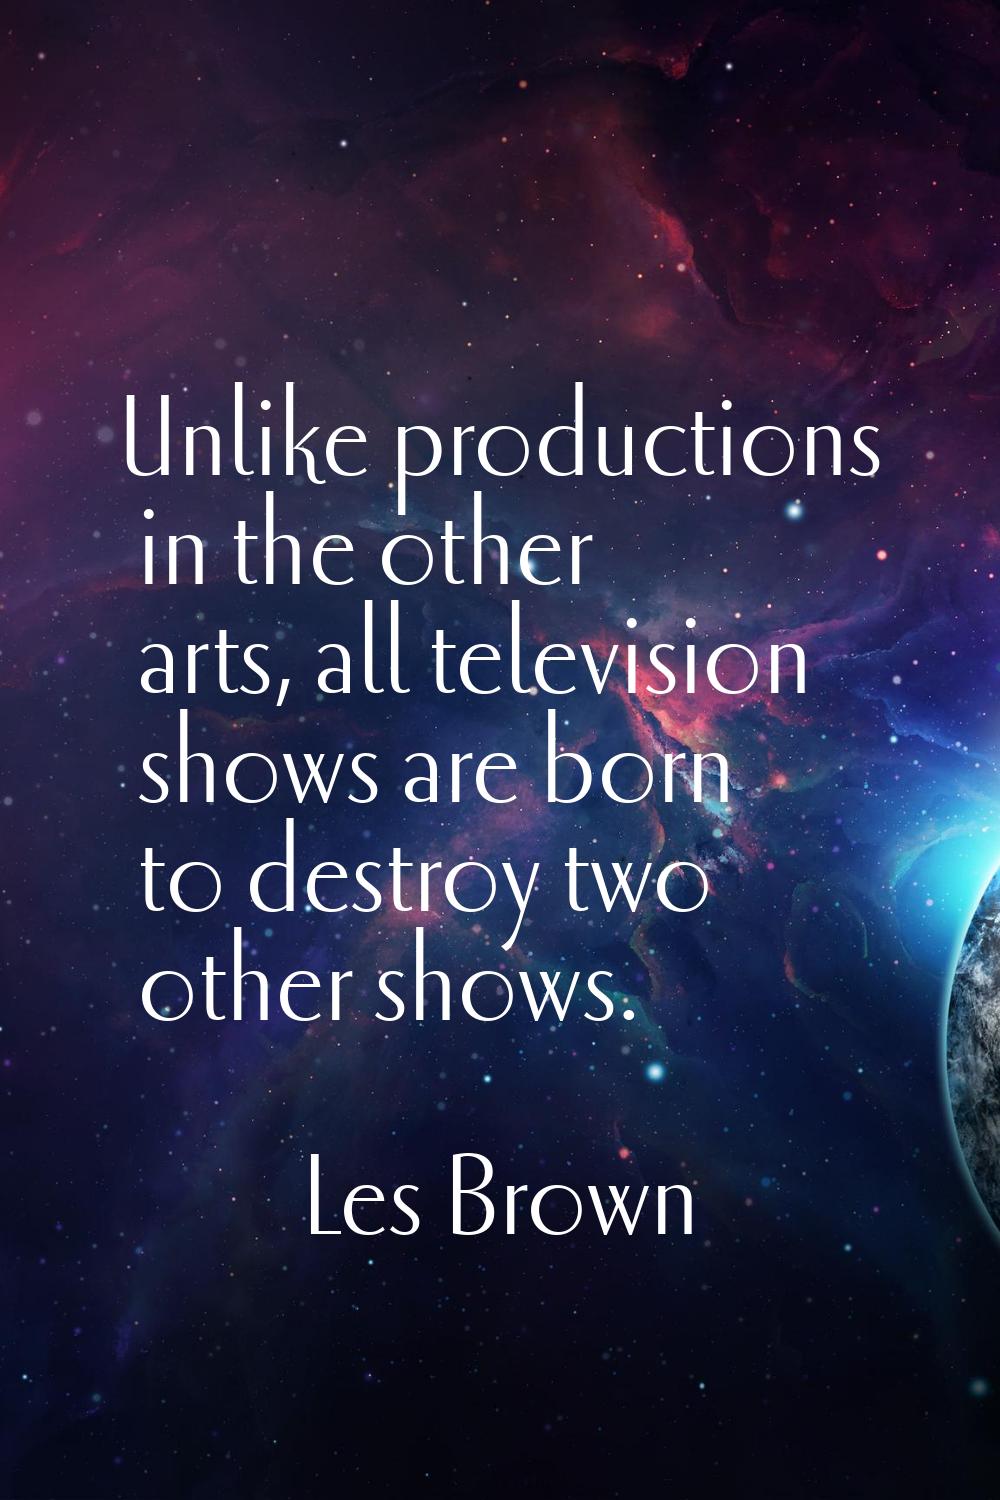 Unlike productions in the other arts, all television shows are born to destroy two other shows.